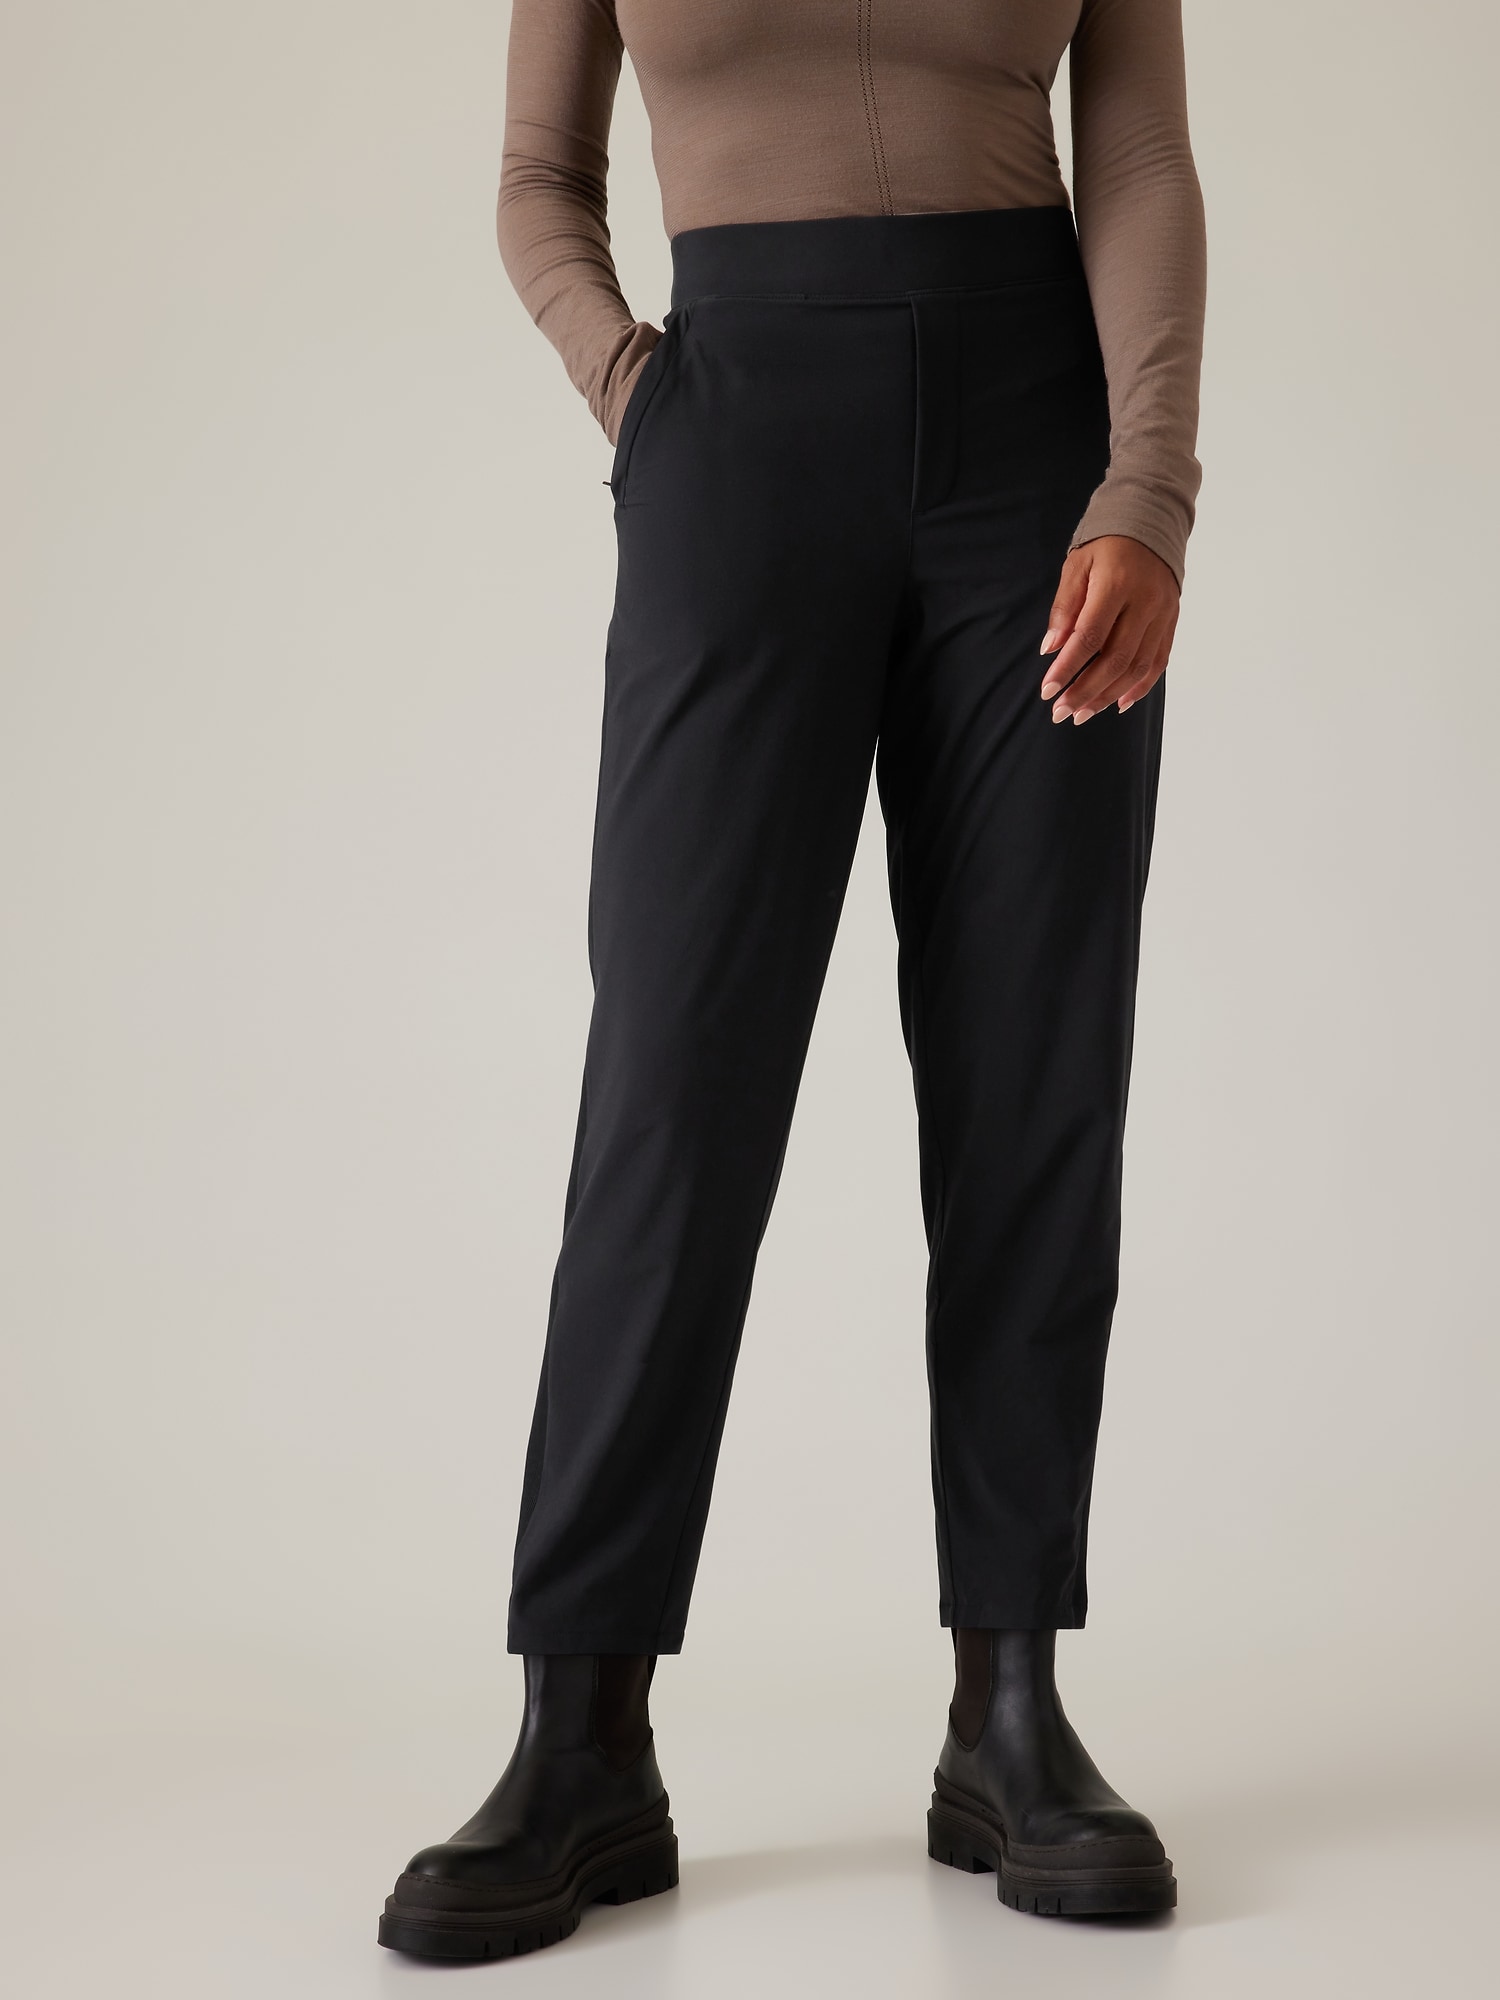 Essentials Women's Brushed Tech Stretch Jogger Pant (Available in Plus  Size) Small Black